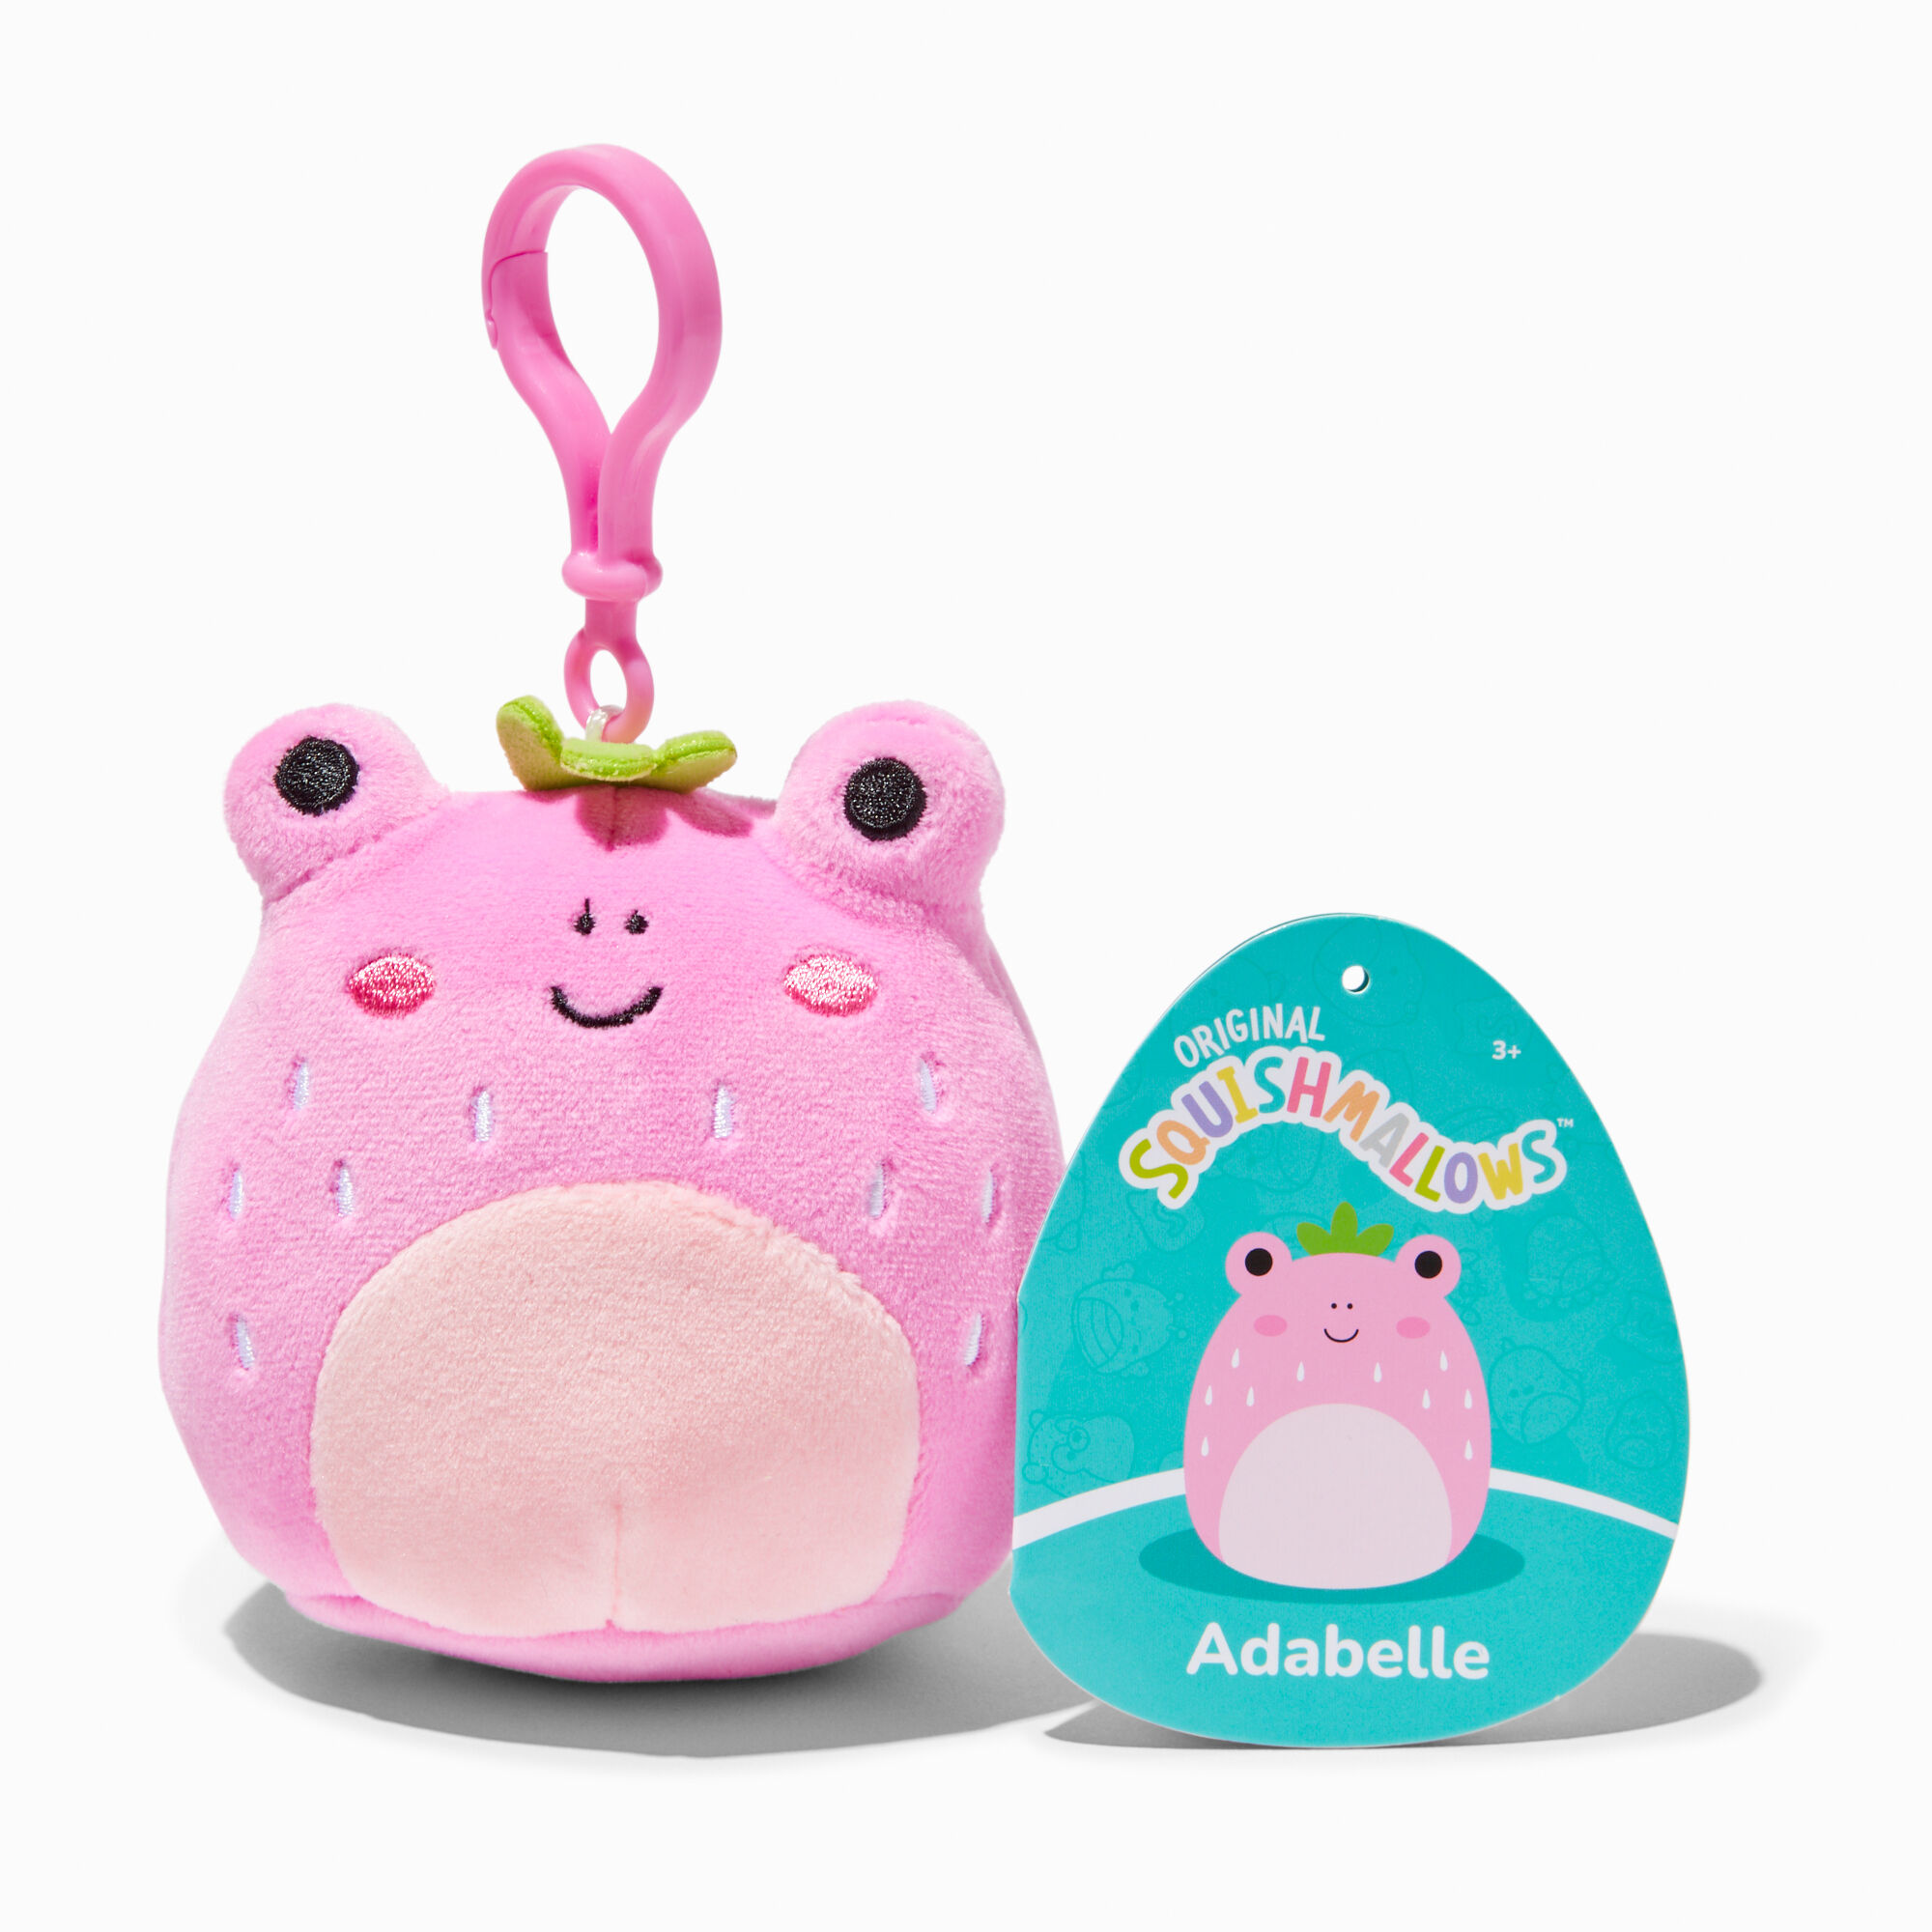 Squishmallows™ 3.5 Adabelle the Strawberry Frog Plush Bag Clip